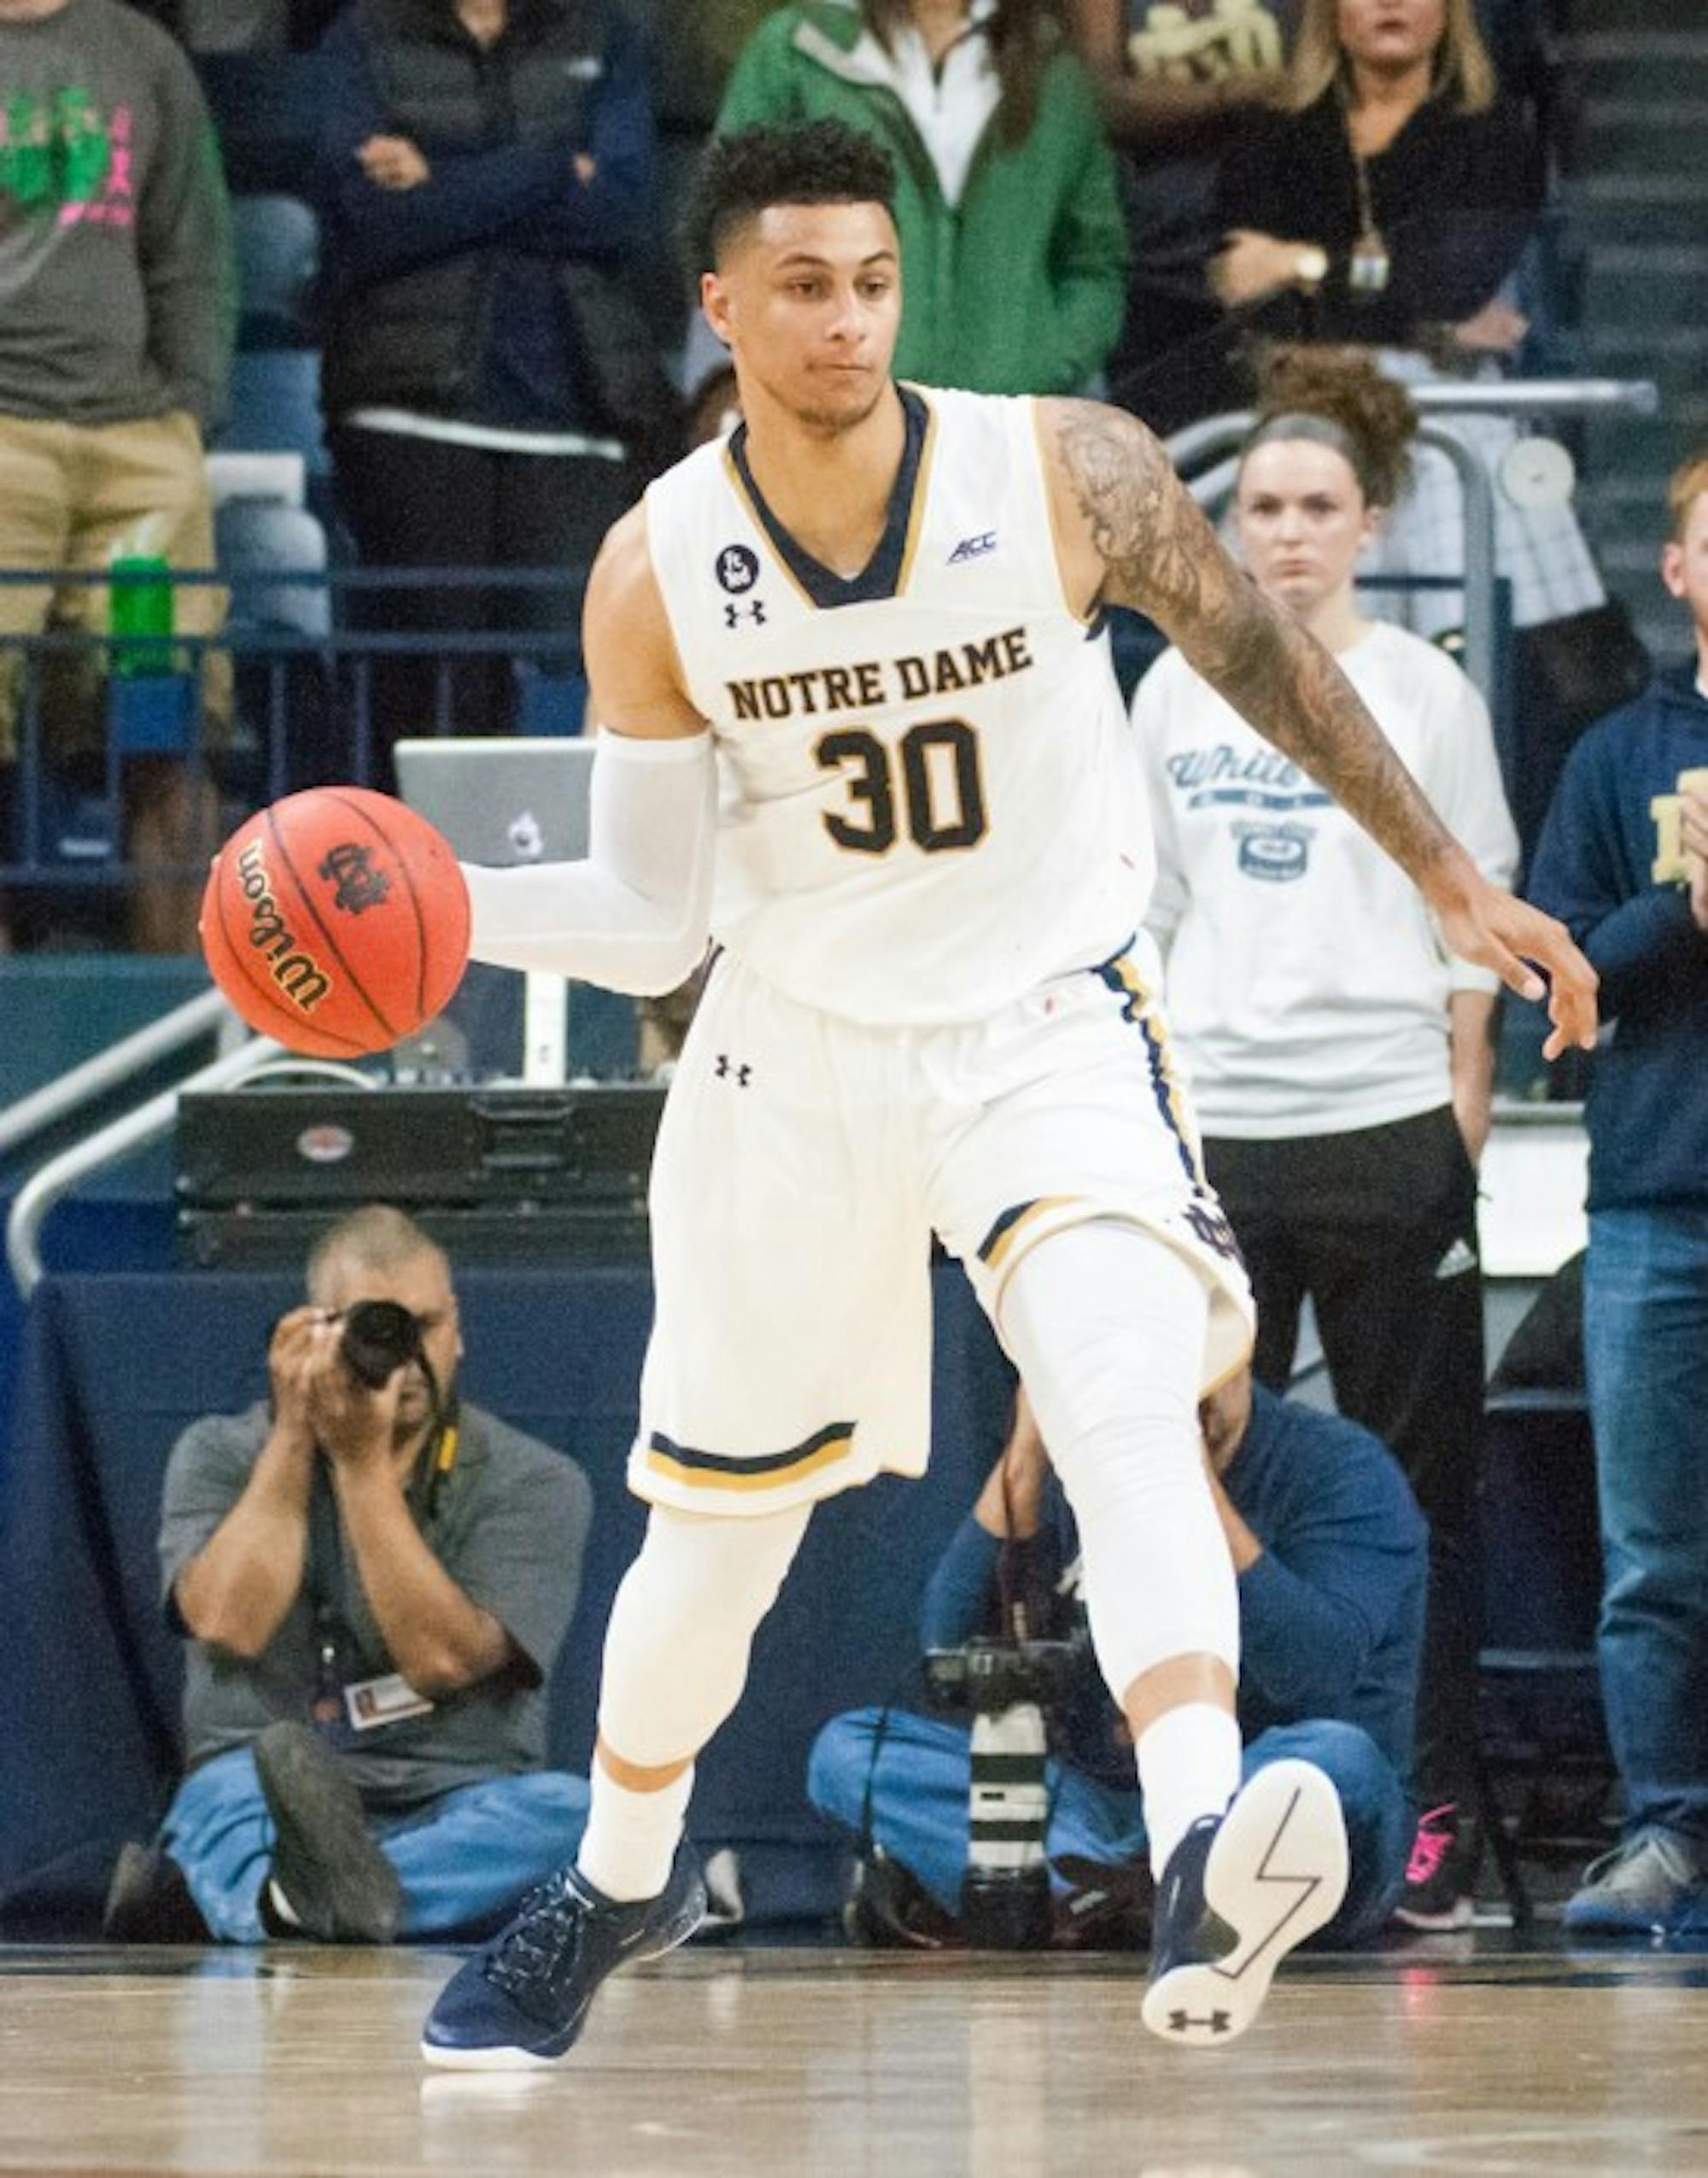 Senior forward Zach Auguste looks to pass during Notre Dame’s 86-78 victory over Milwaukee on Tuesday night at Purcell Pavilion.